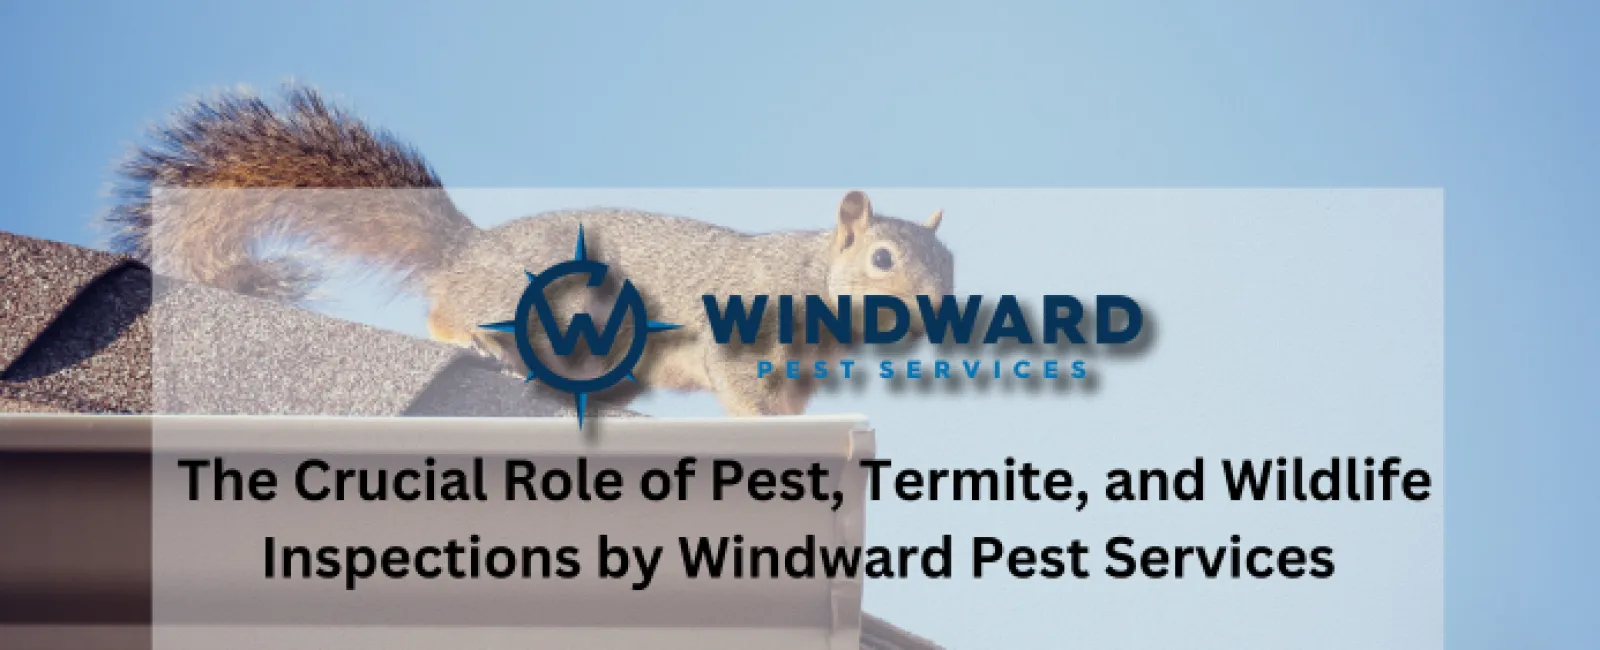 The Crucial Role of Pest, Termite, and Wildlife Inspections by Windward Pest Services